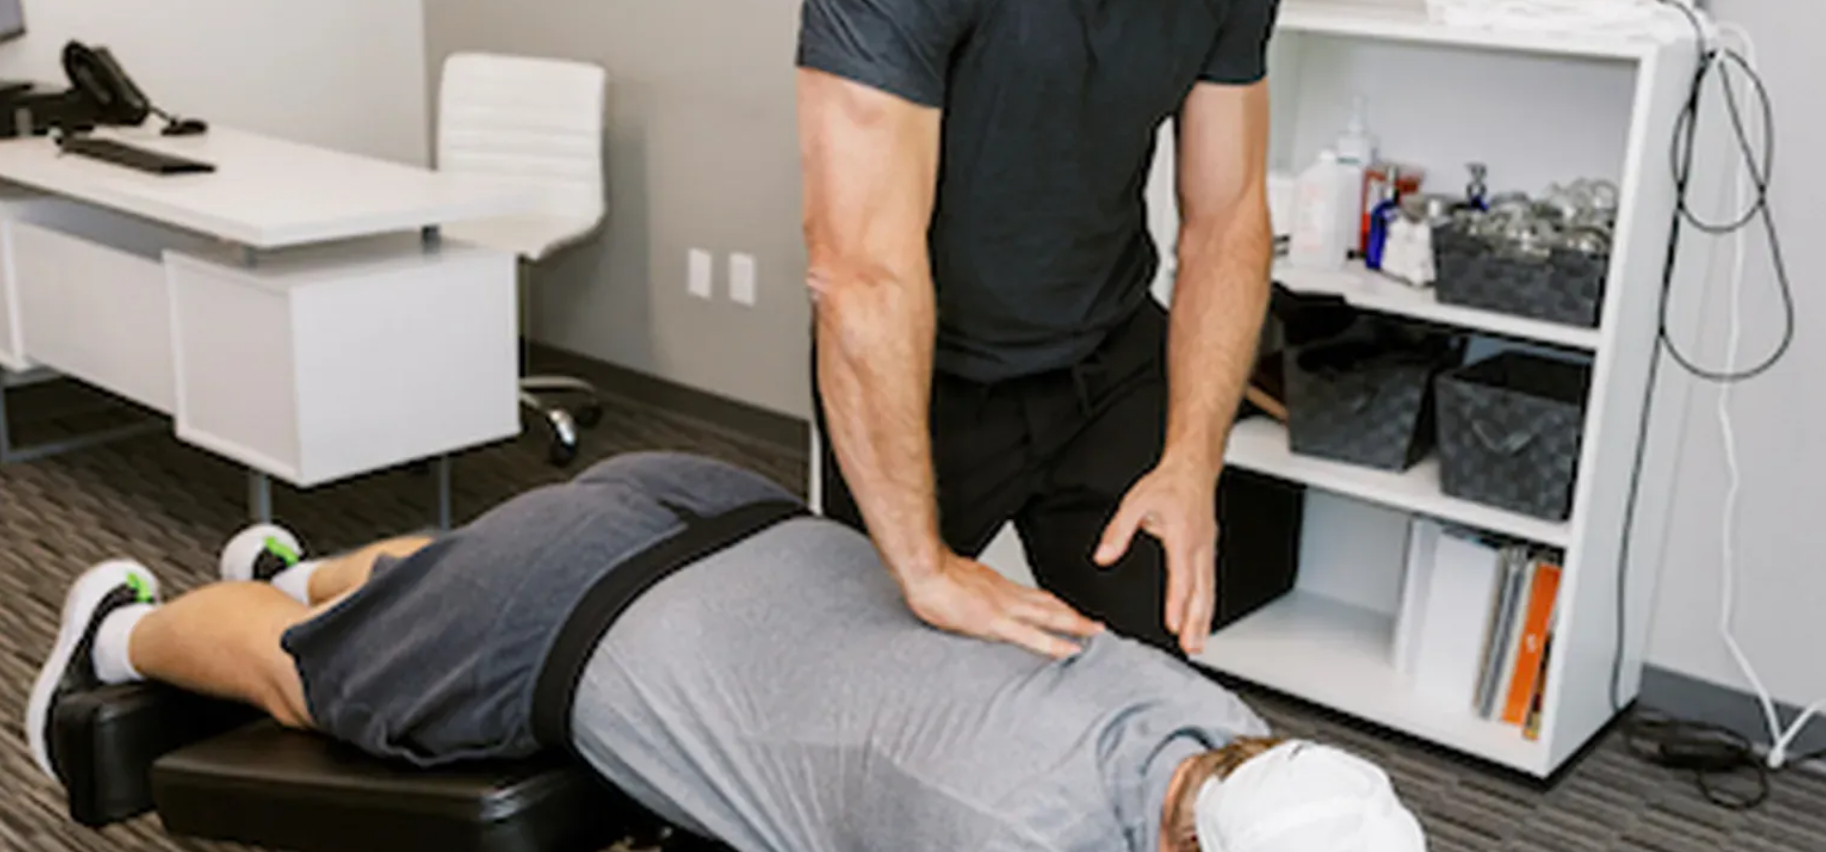 Chiropractor in Los Angeles, Parafin Treatment/ Cupping in Los Angeles